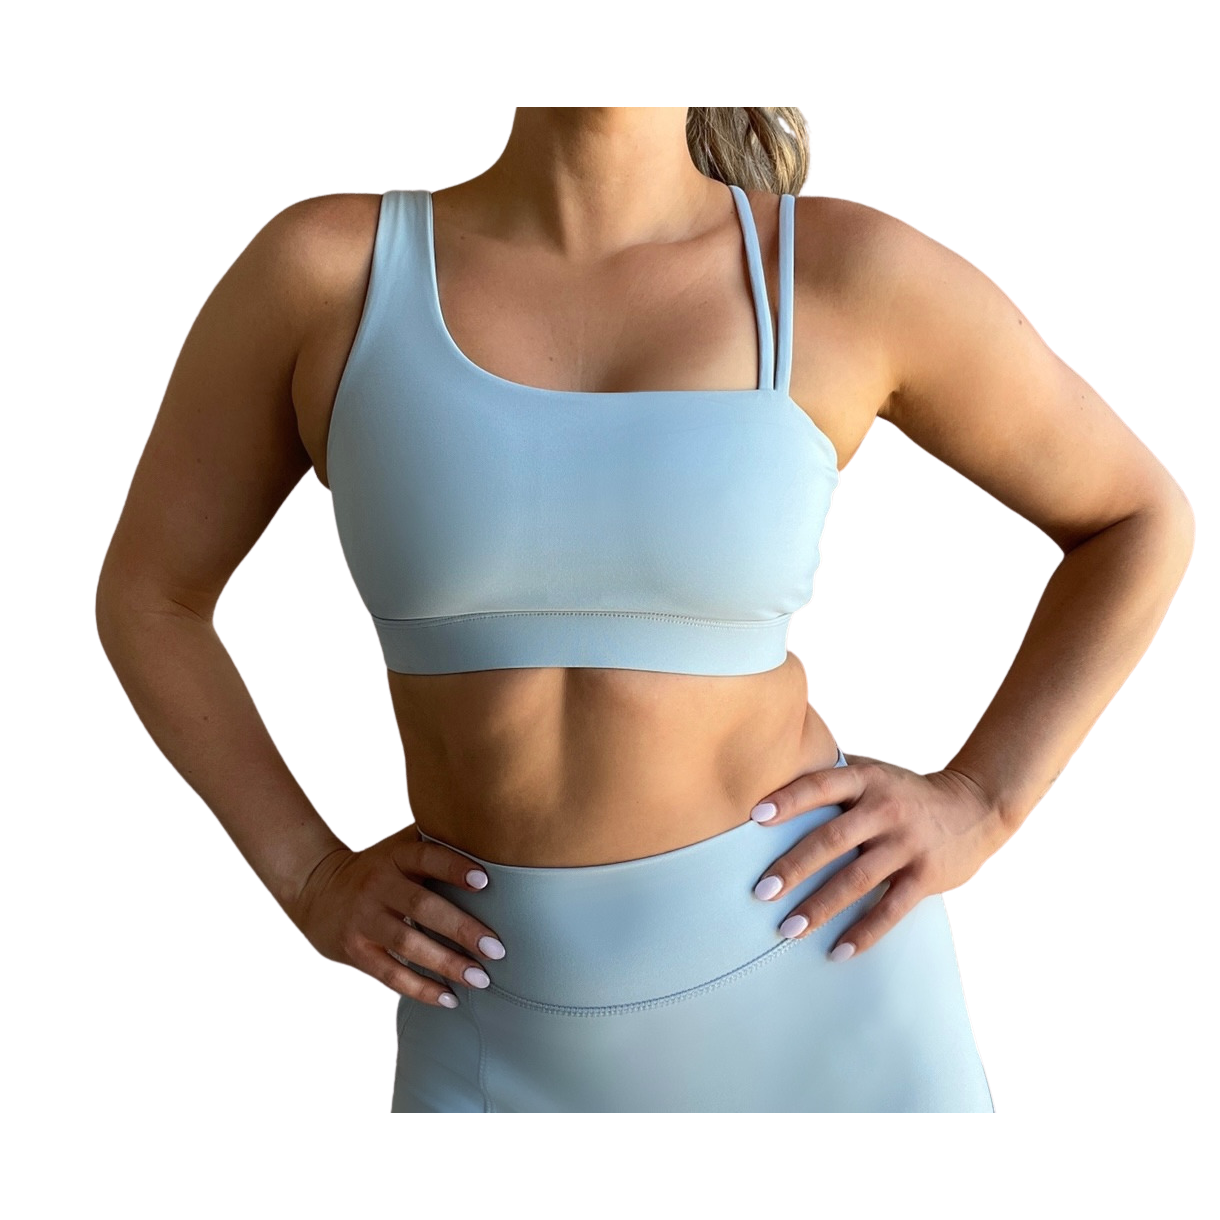 Dusty blue asymmetrical sports bra with one thick strap and two thinner straps